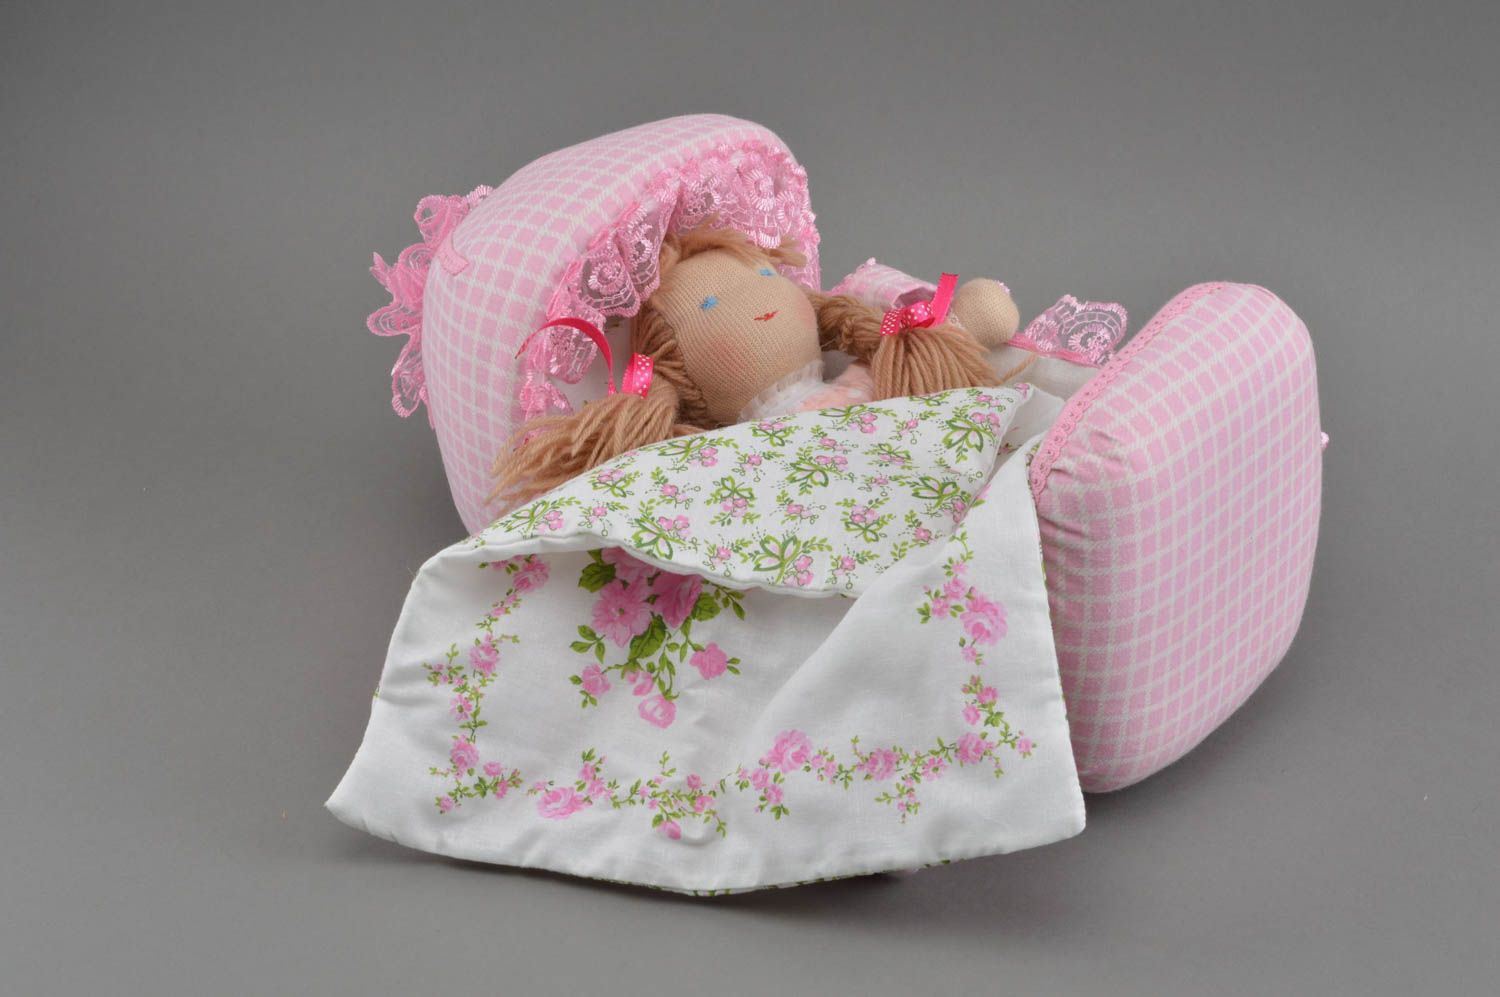 Cradle for doll soft cloth toy handmade stuffed toy bed doll furniture photo 1